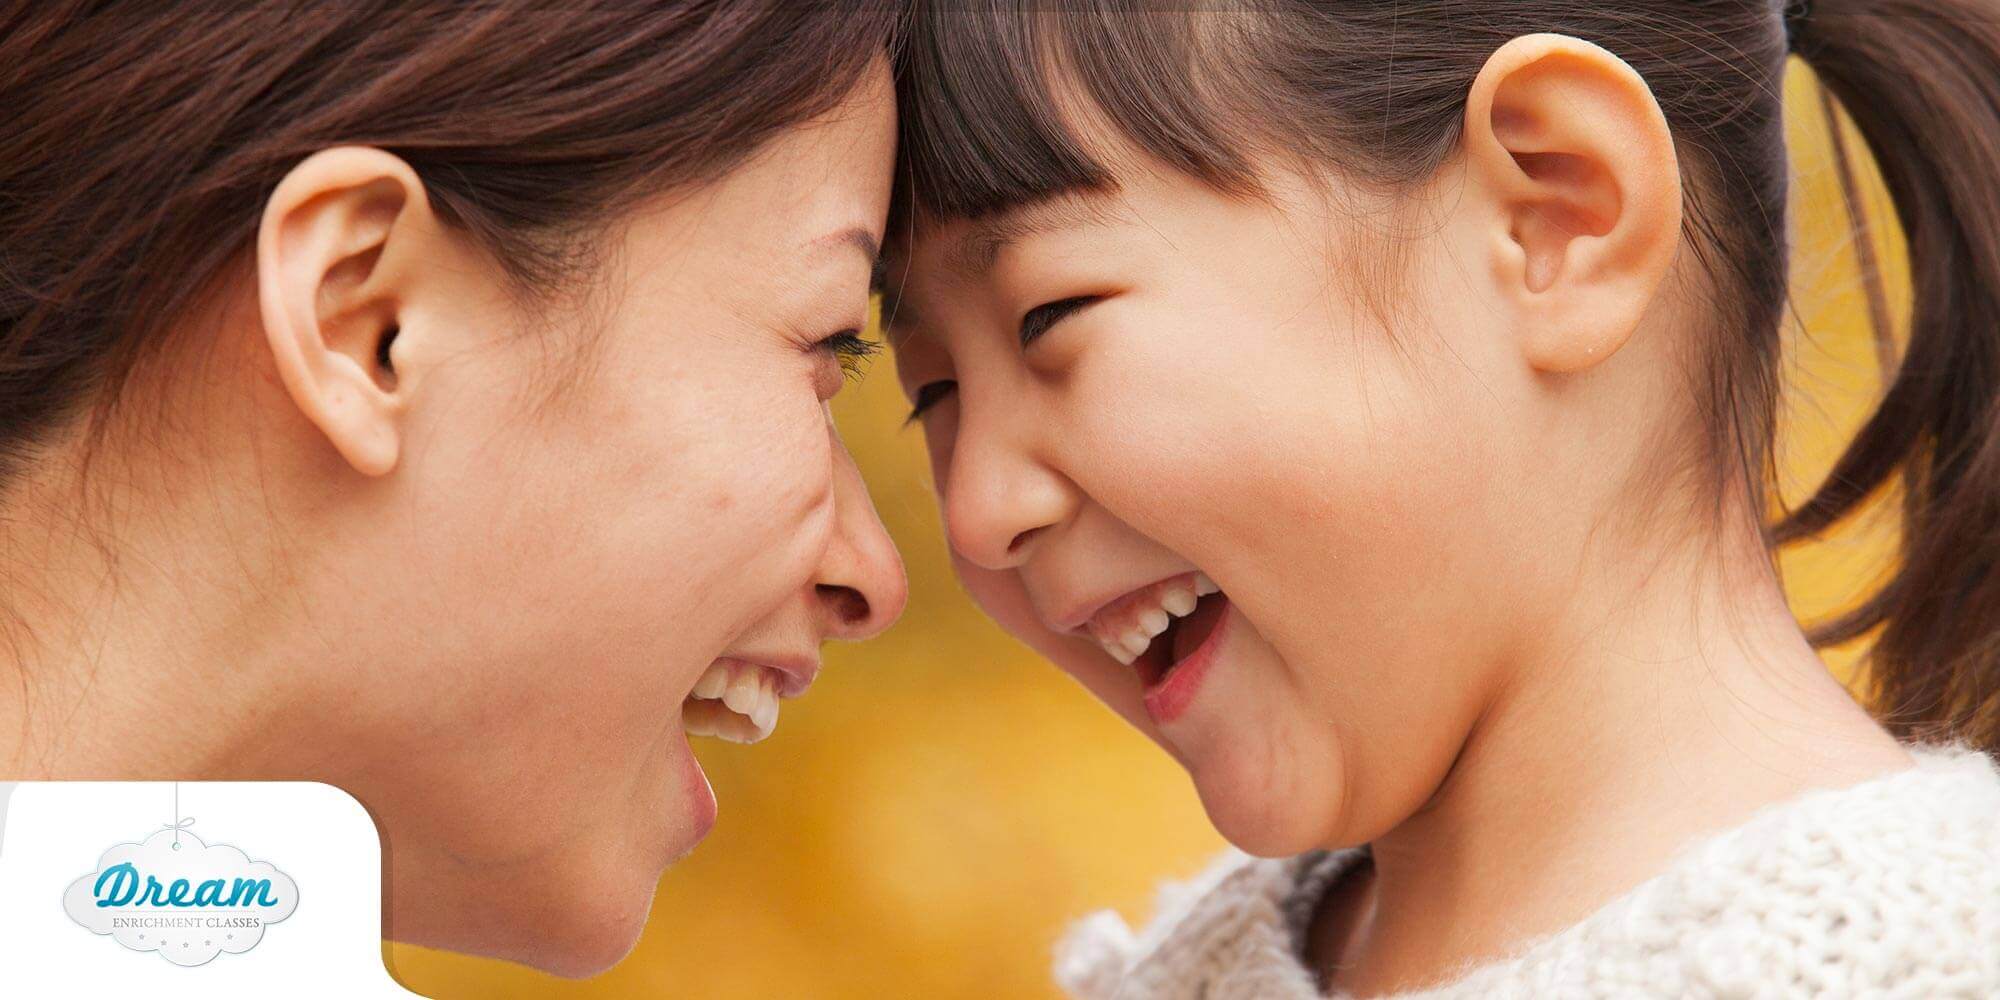 10 Powerful Things to Say to Your Kids